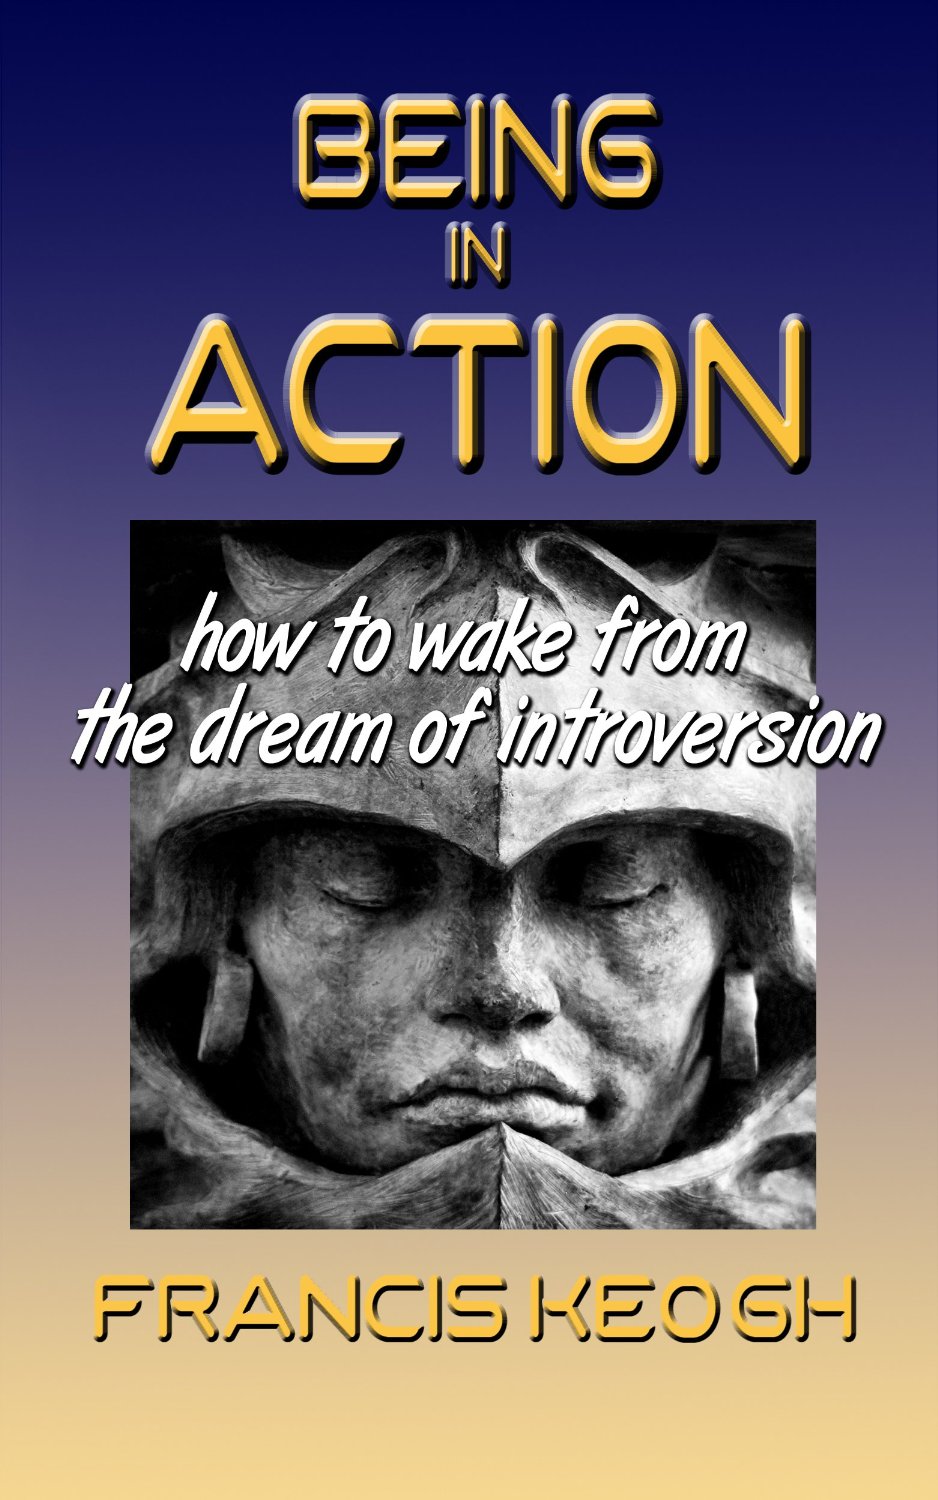 Being In Action – How to Wake from the Dream of Introversion by Francis Keogh